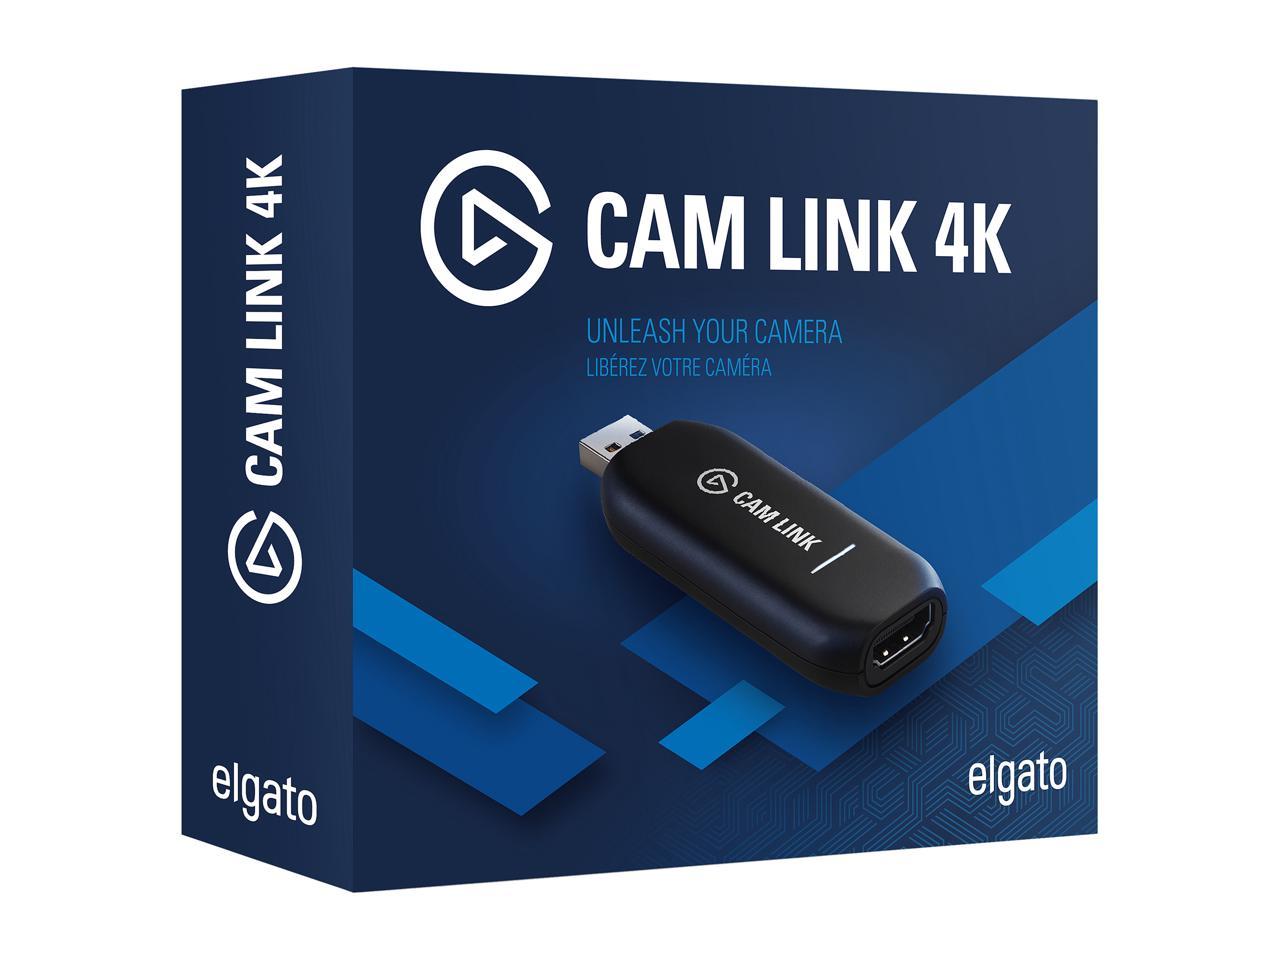 Elgato Cam Link 4K - HDMI to USB 3.0 Camera Connector, Broadcast Live and Record in 1080p60 or 4K at 30 fps via a Compatible DSLR, Camcorder or Action Cam - image 5 of 5